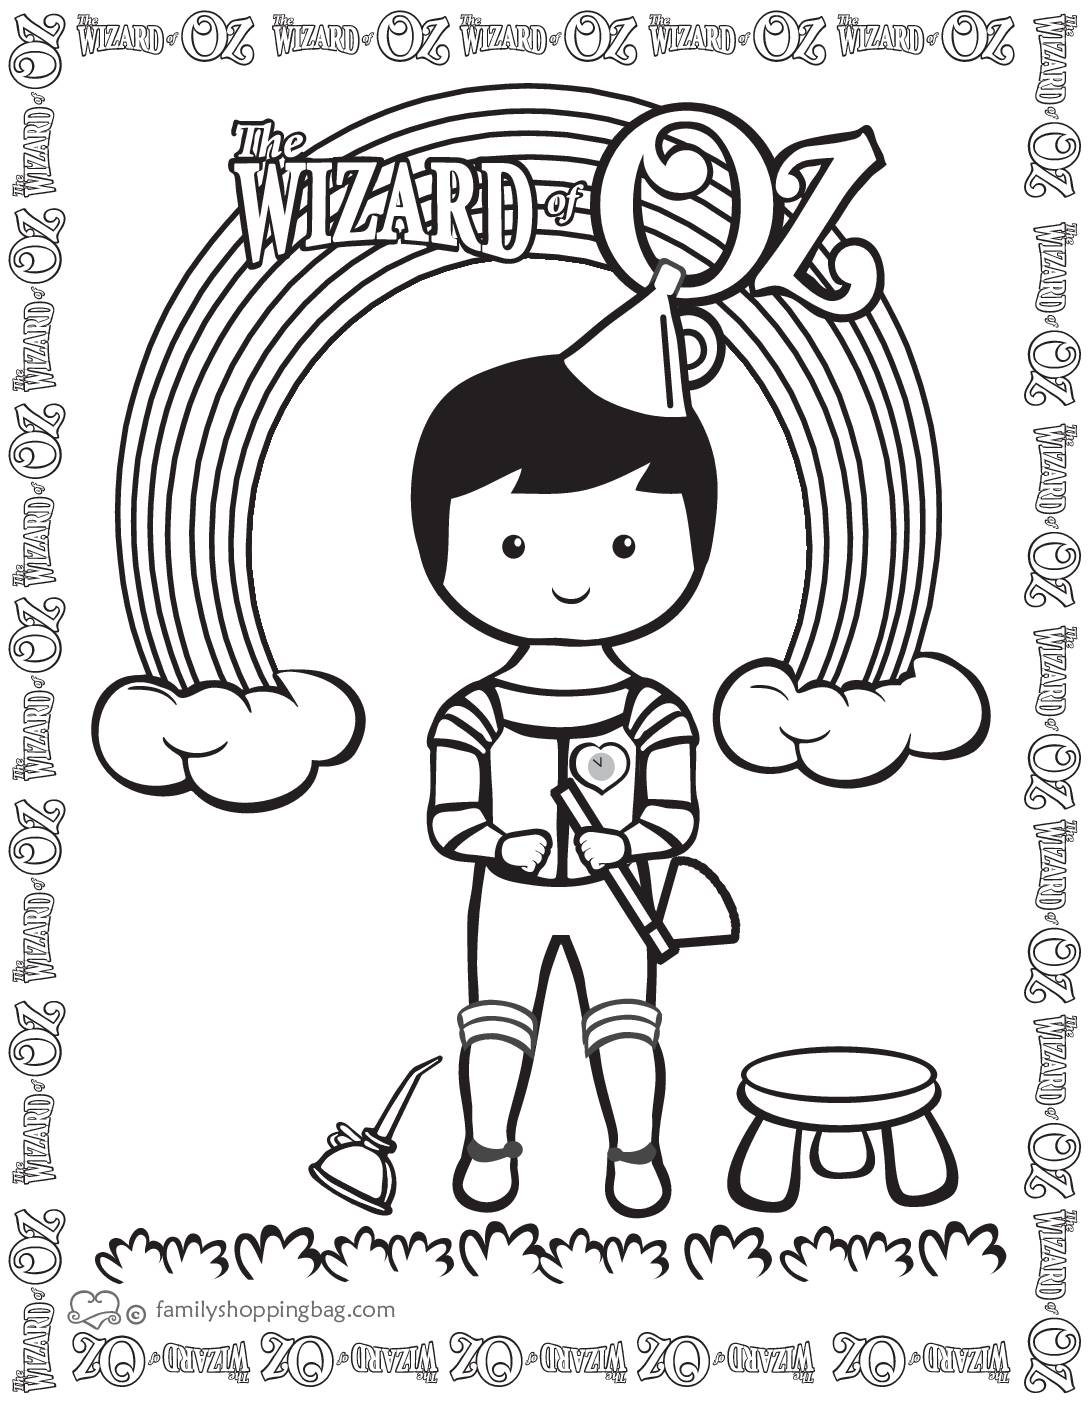 Coloring Page 6 Wizard of Oz